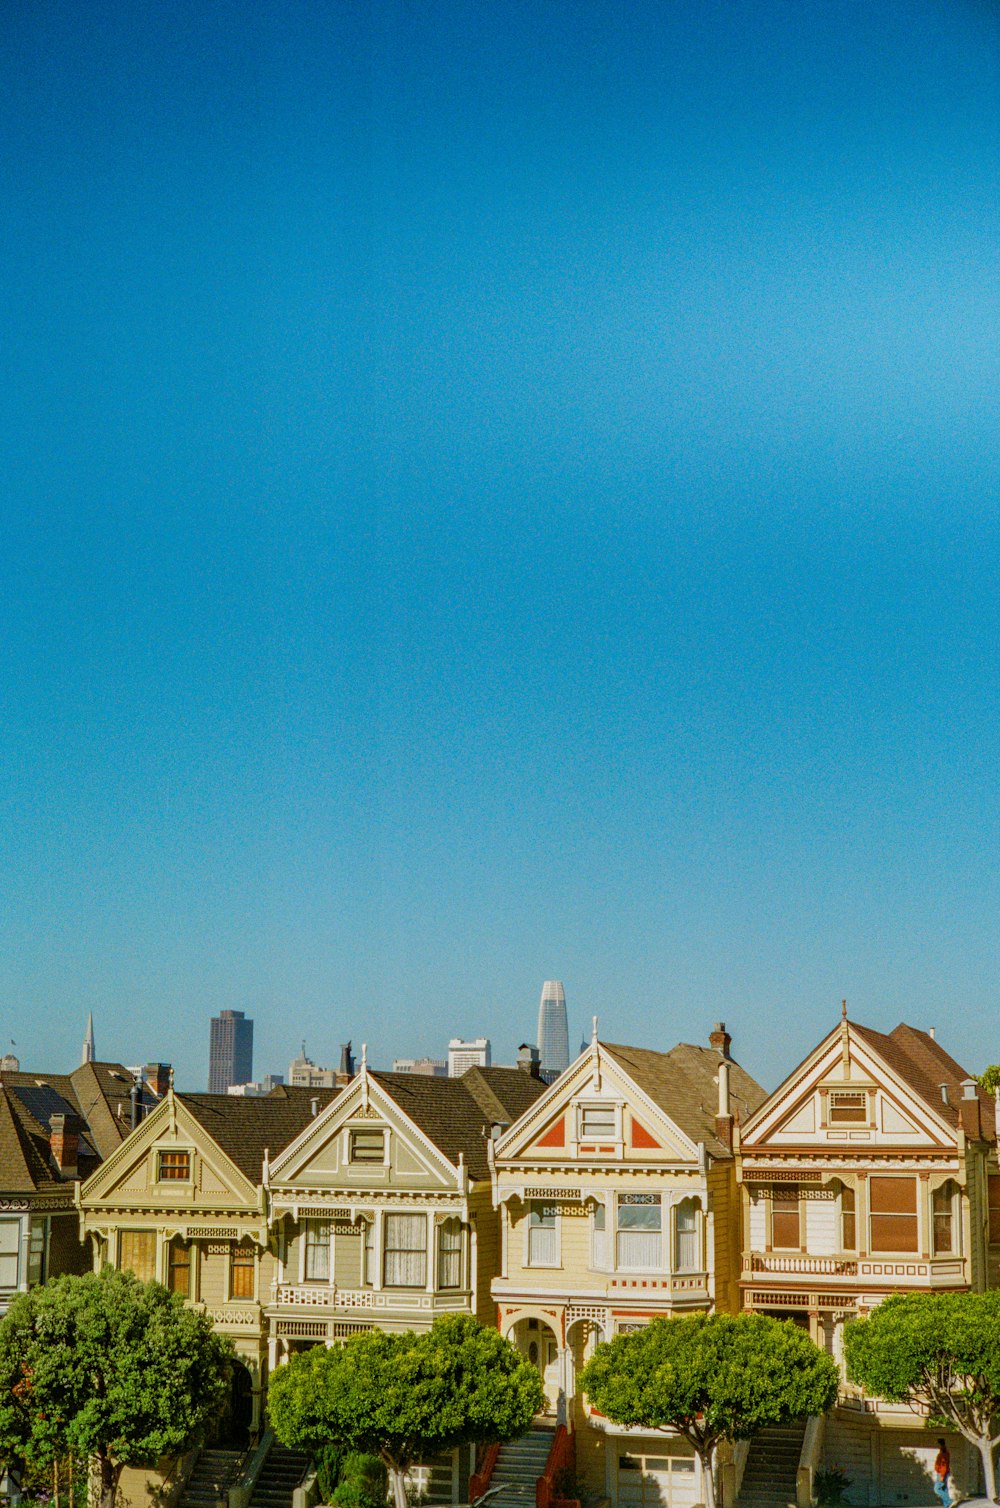 brown and white houses under blue sky during daytime